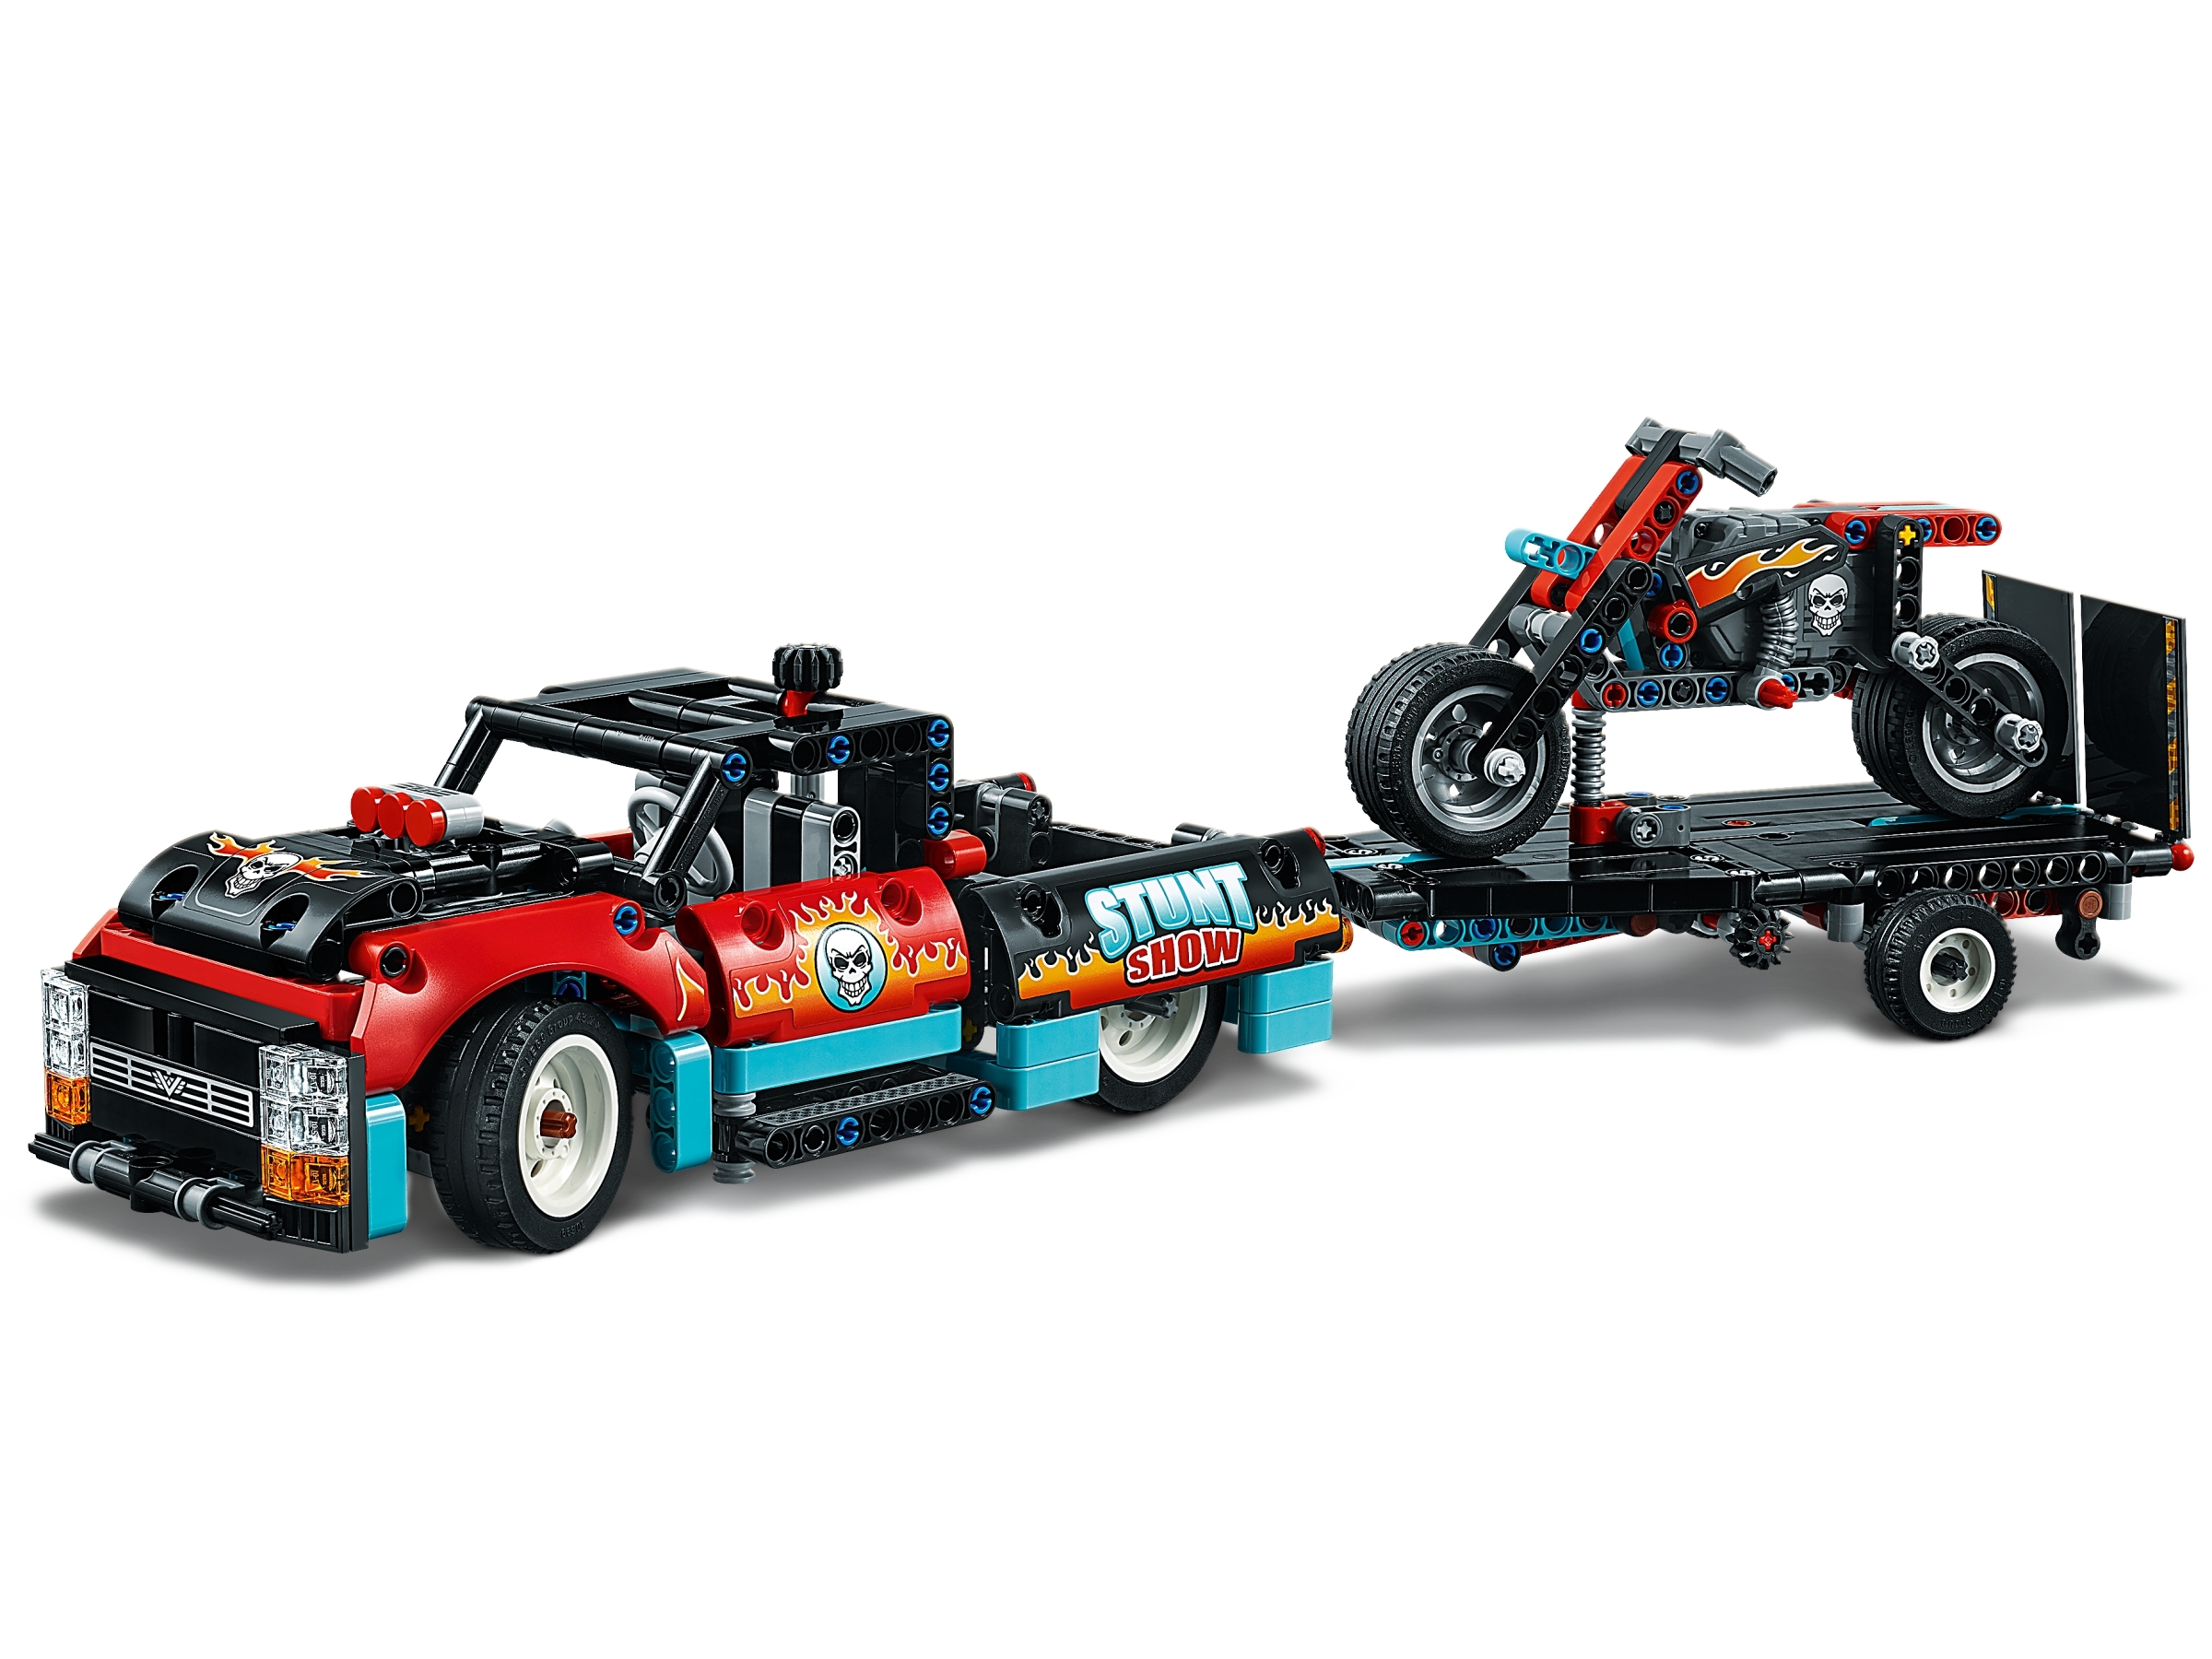 LEGO Technic Stunt Show Truck & Bike 42106; Includes Stunt Motorcycle Toy Truck and Trailer New 2020 P10 Pieces 